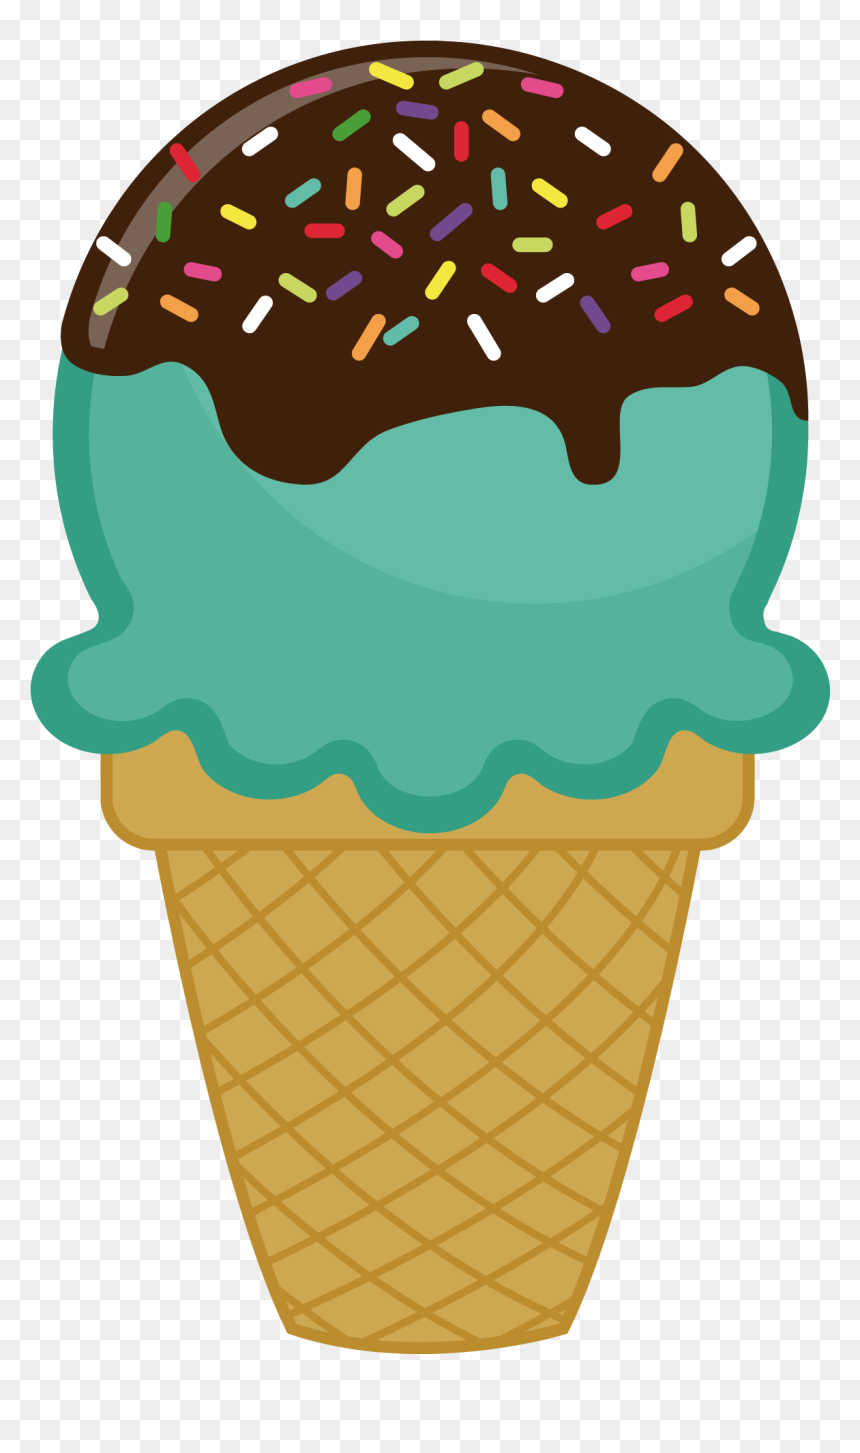 Yummy Ice Cream Clipart Set / Instant Download 14002 